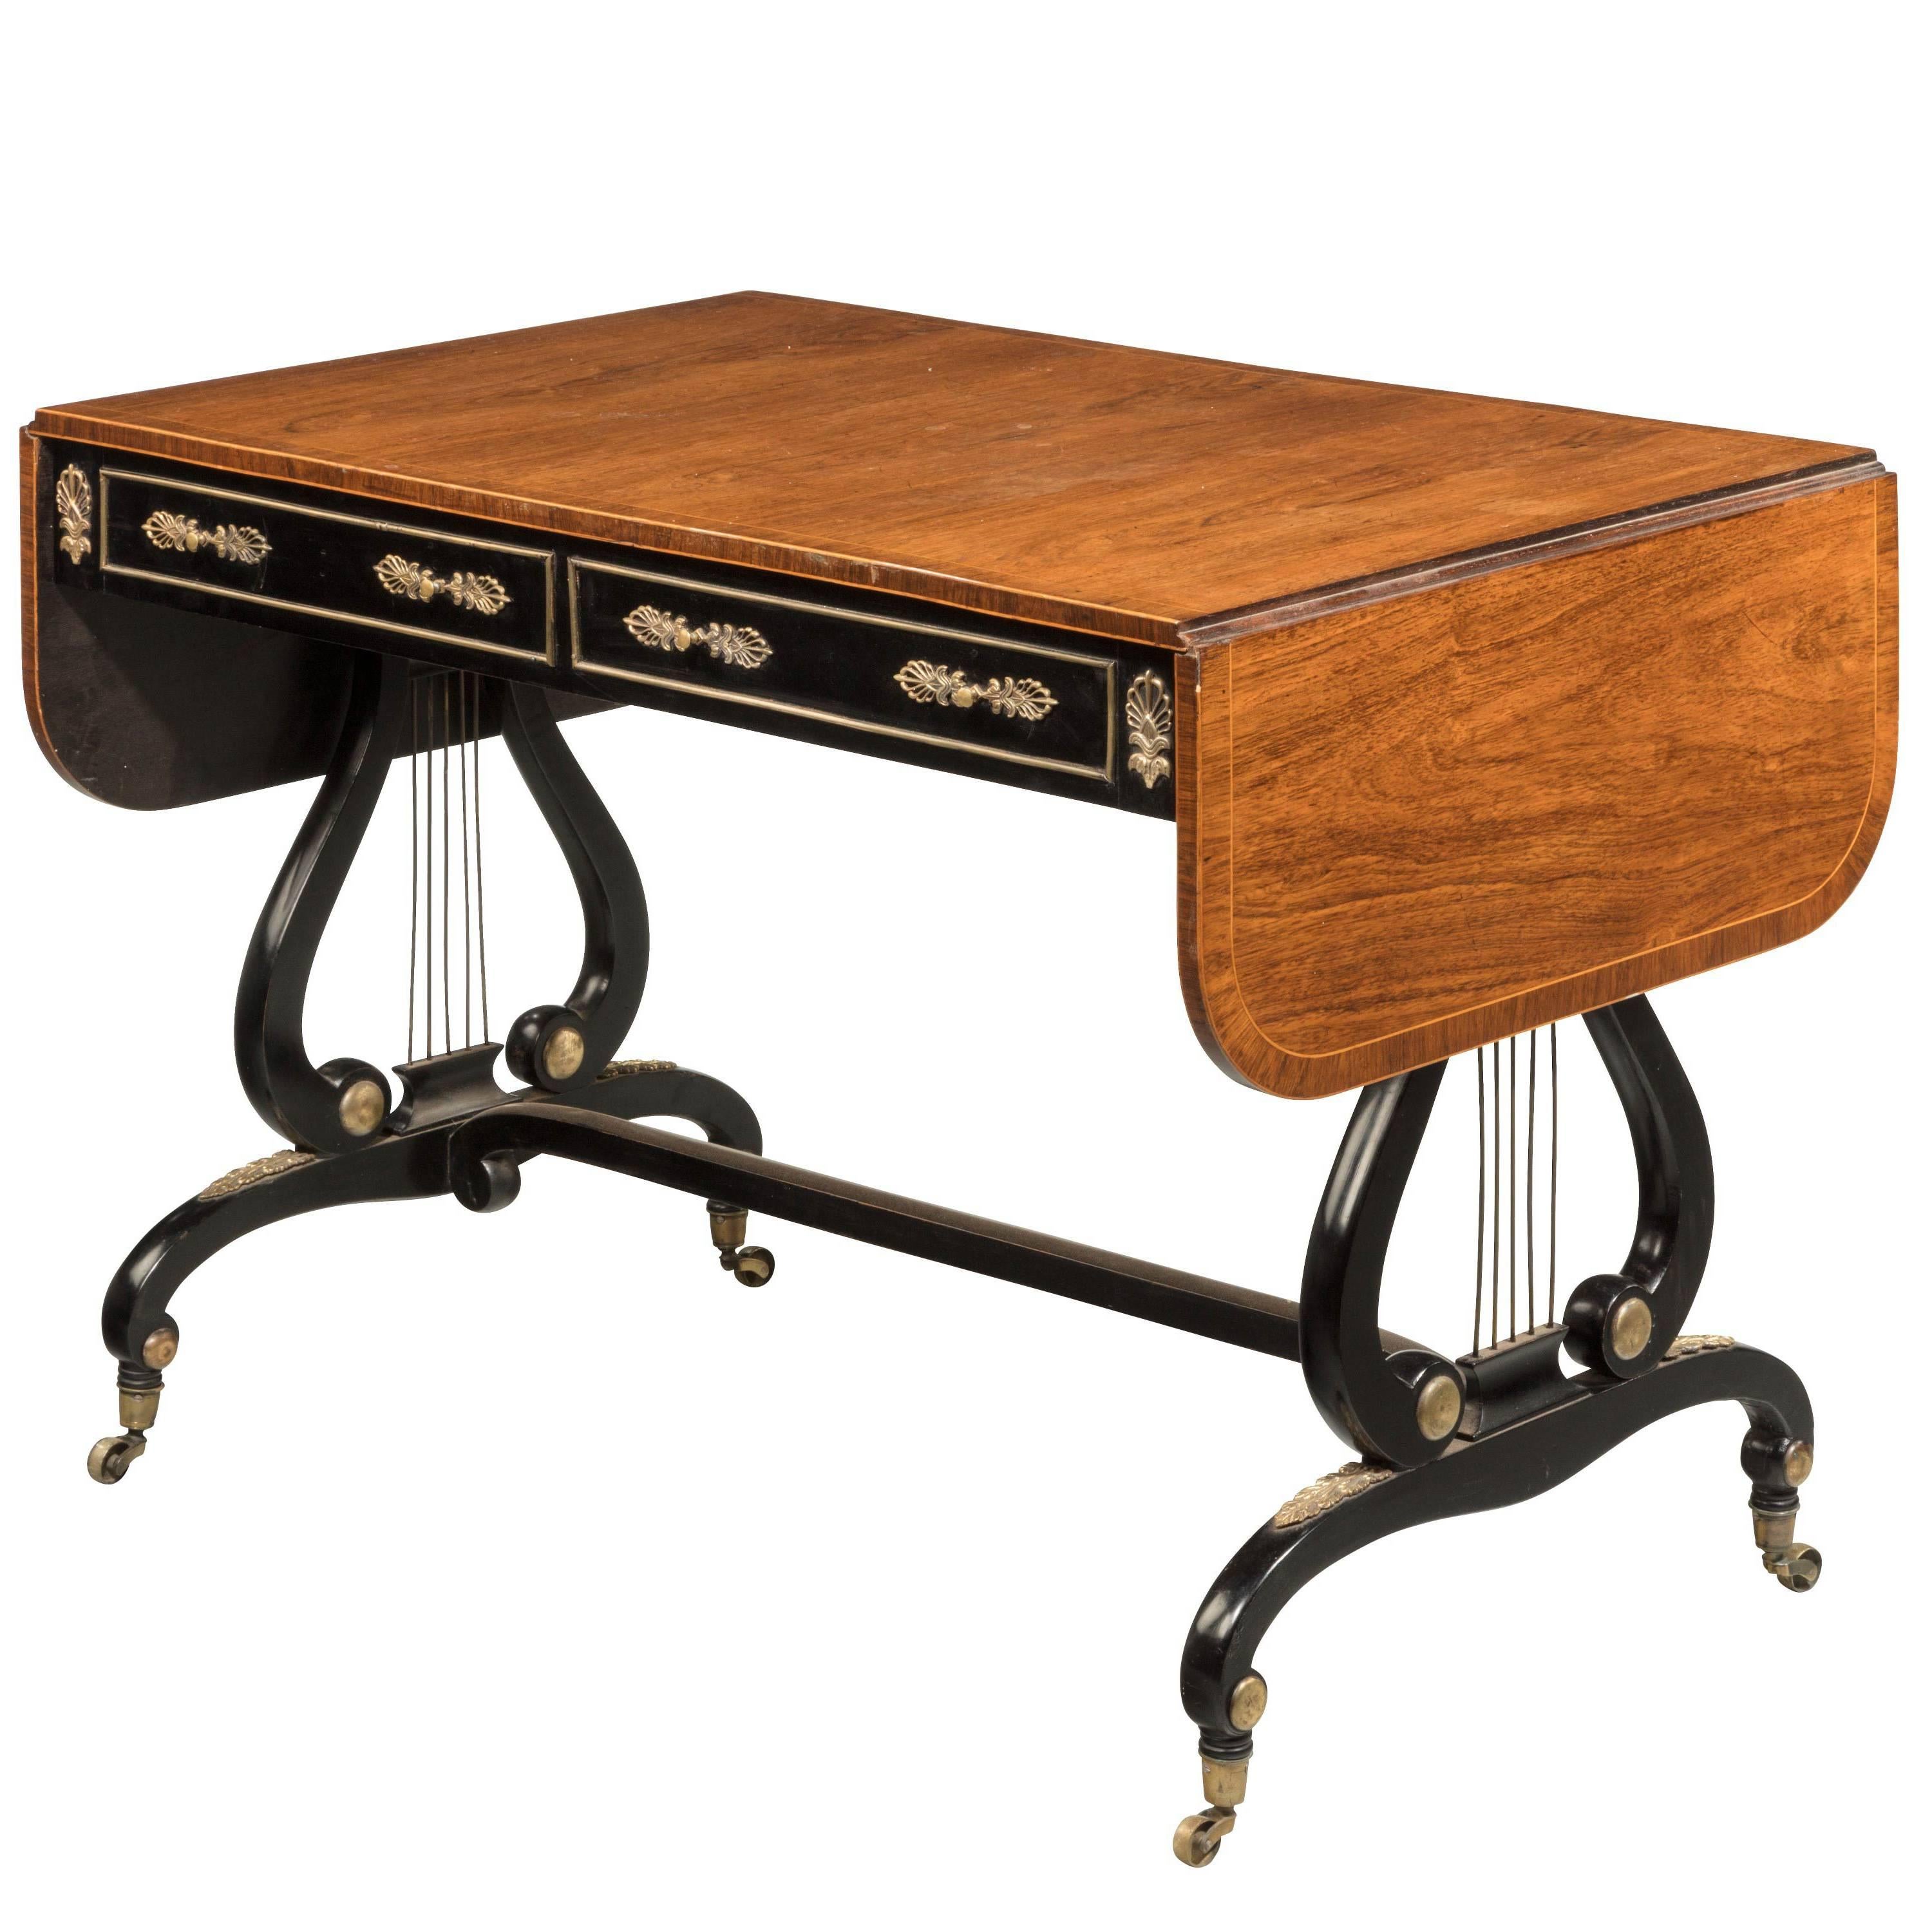 Regency Period Rosewood Sofa Table of the Most Elegant Form